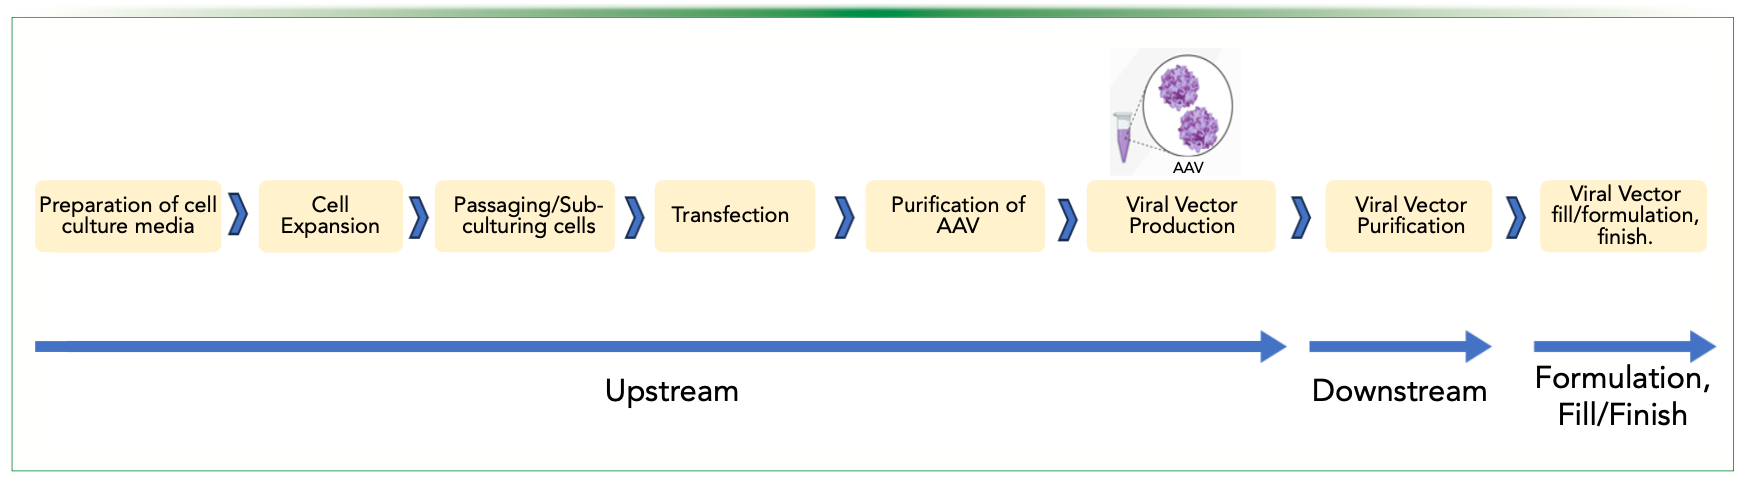 FIGURE 1: Viral vector manufacturing process workflow, which involves various upstream, downstream, formulation, and fill/finish steps. Figure is adapted from reference (4).